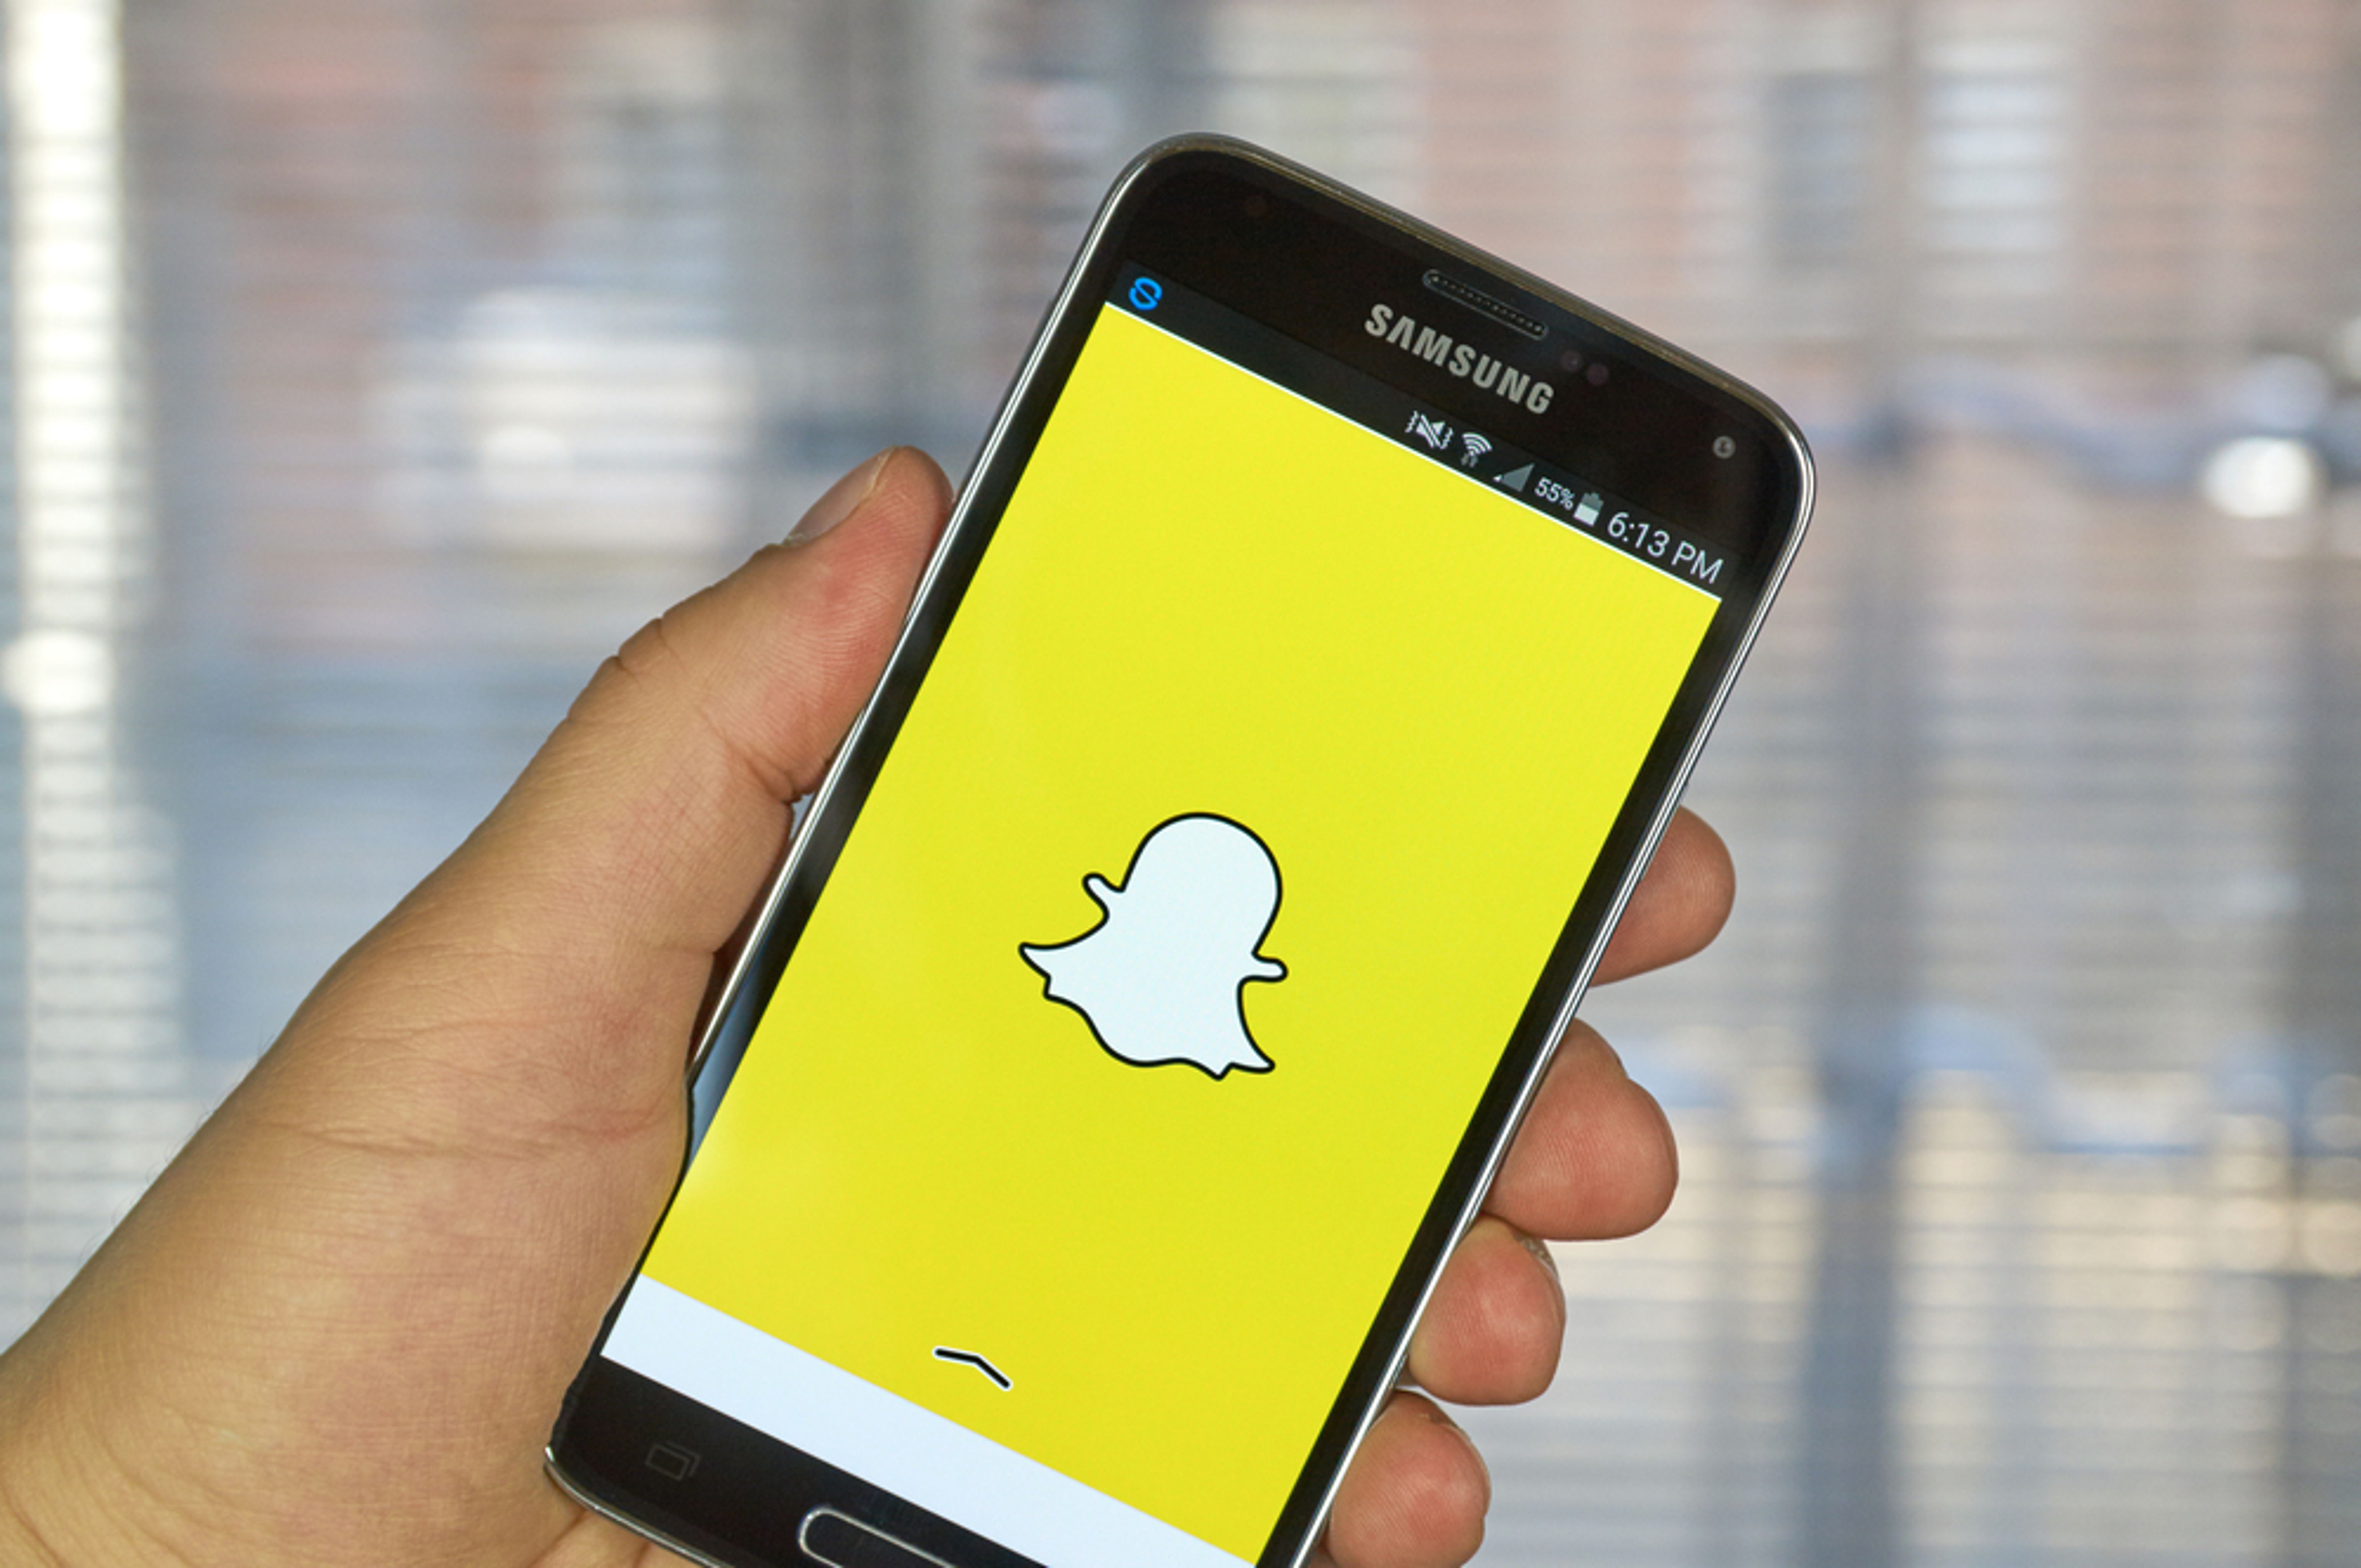 PreMarket Prep Stock Of The Day: Why This Analyst Says Snap May Be Worth &#39;Buying The Dip&#39;